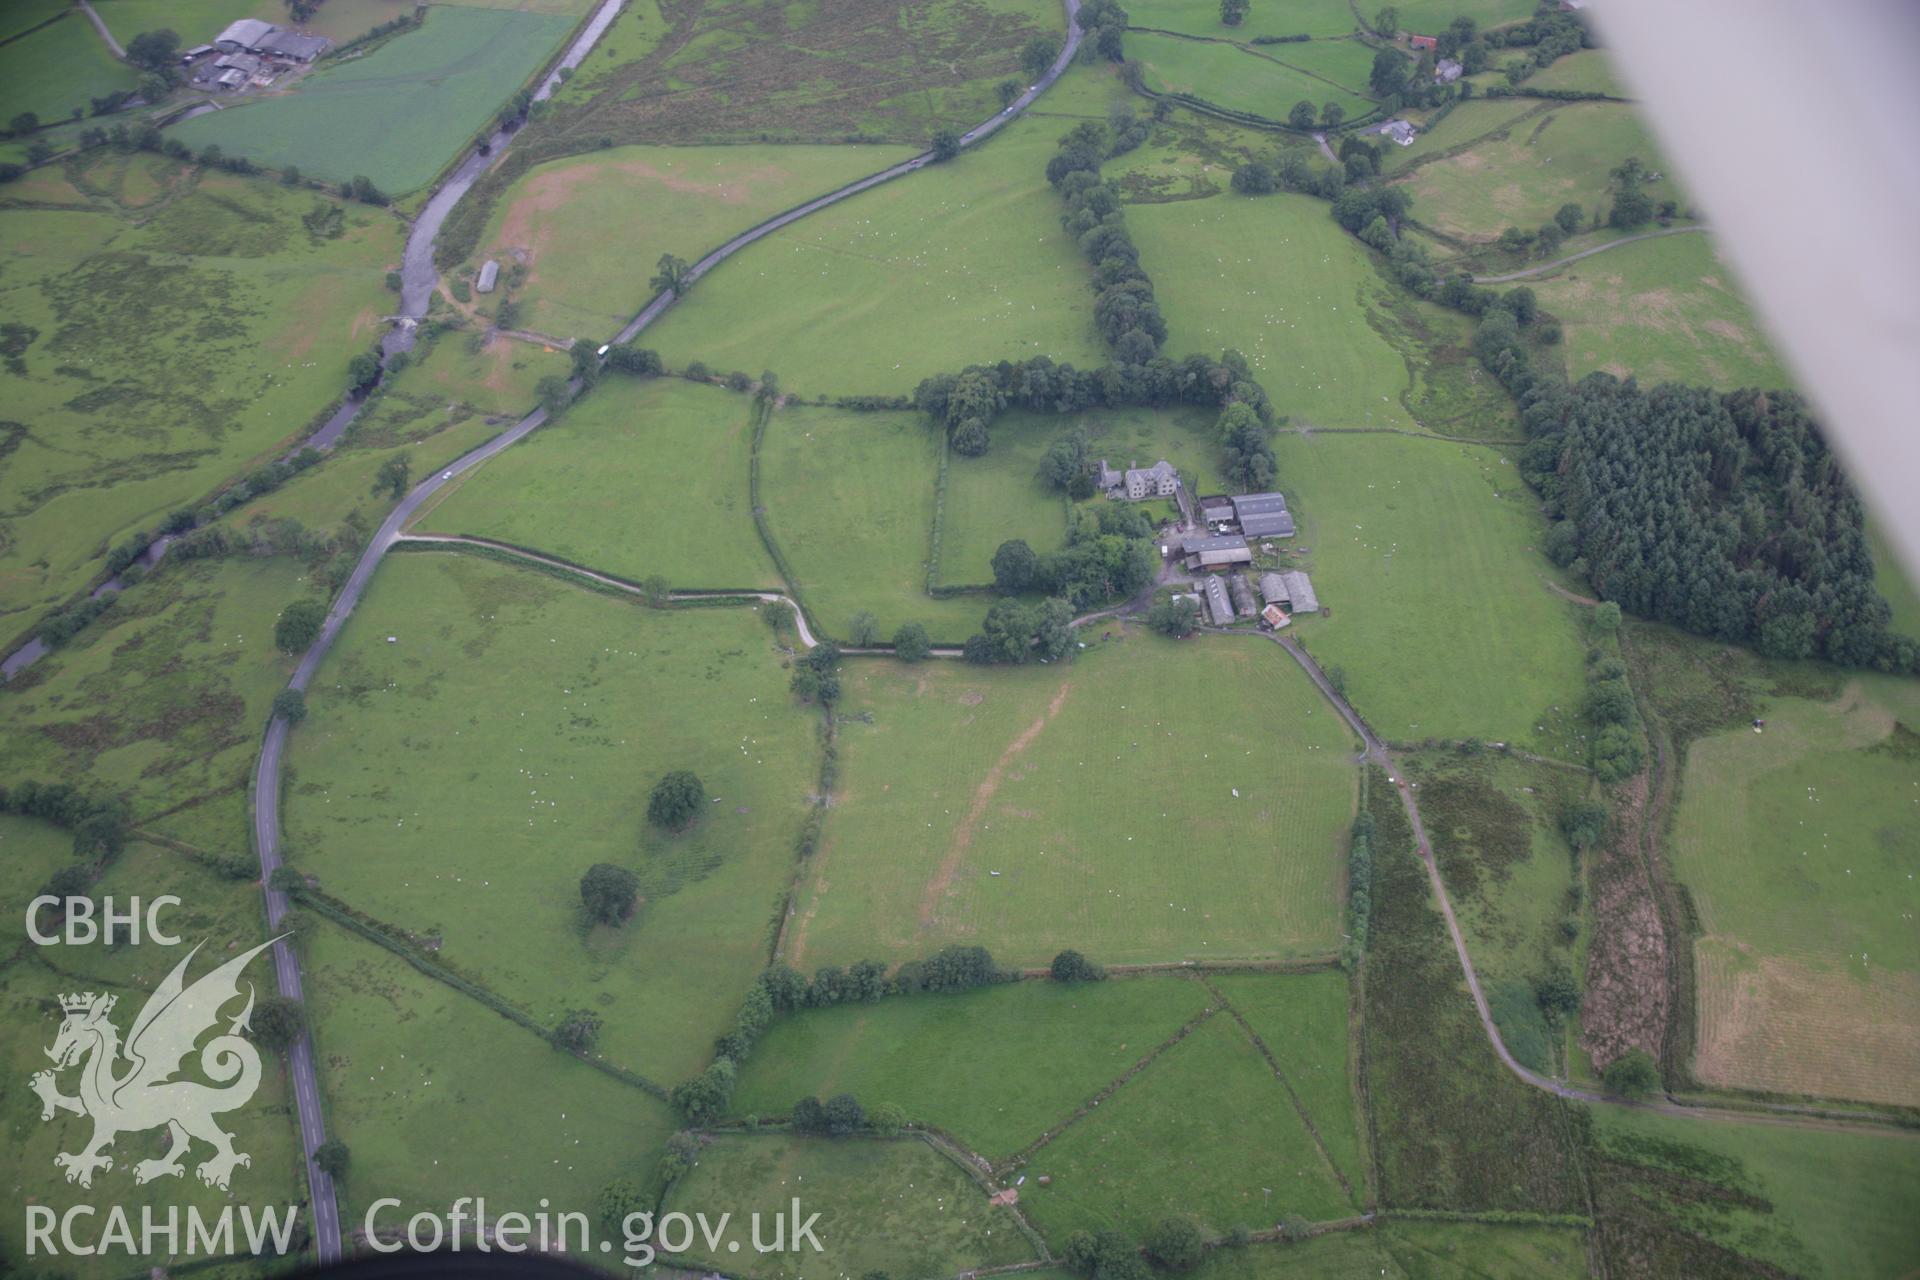 RCAHMW colour oblique aerial photograph of Caer Gai Roman Military Settlement. Taken on 31 July 2006 by Toby Driver.